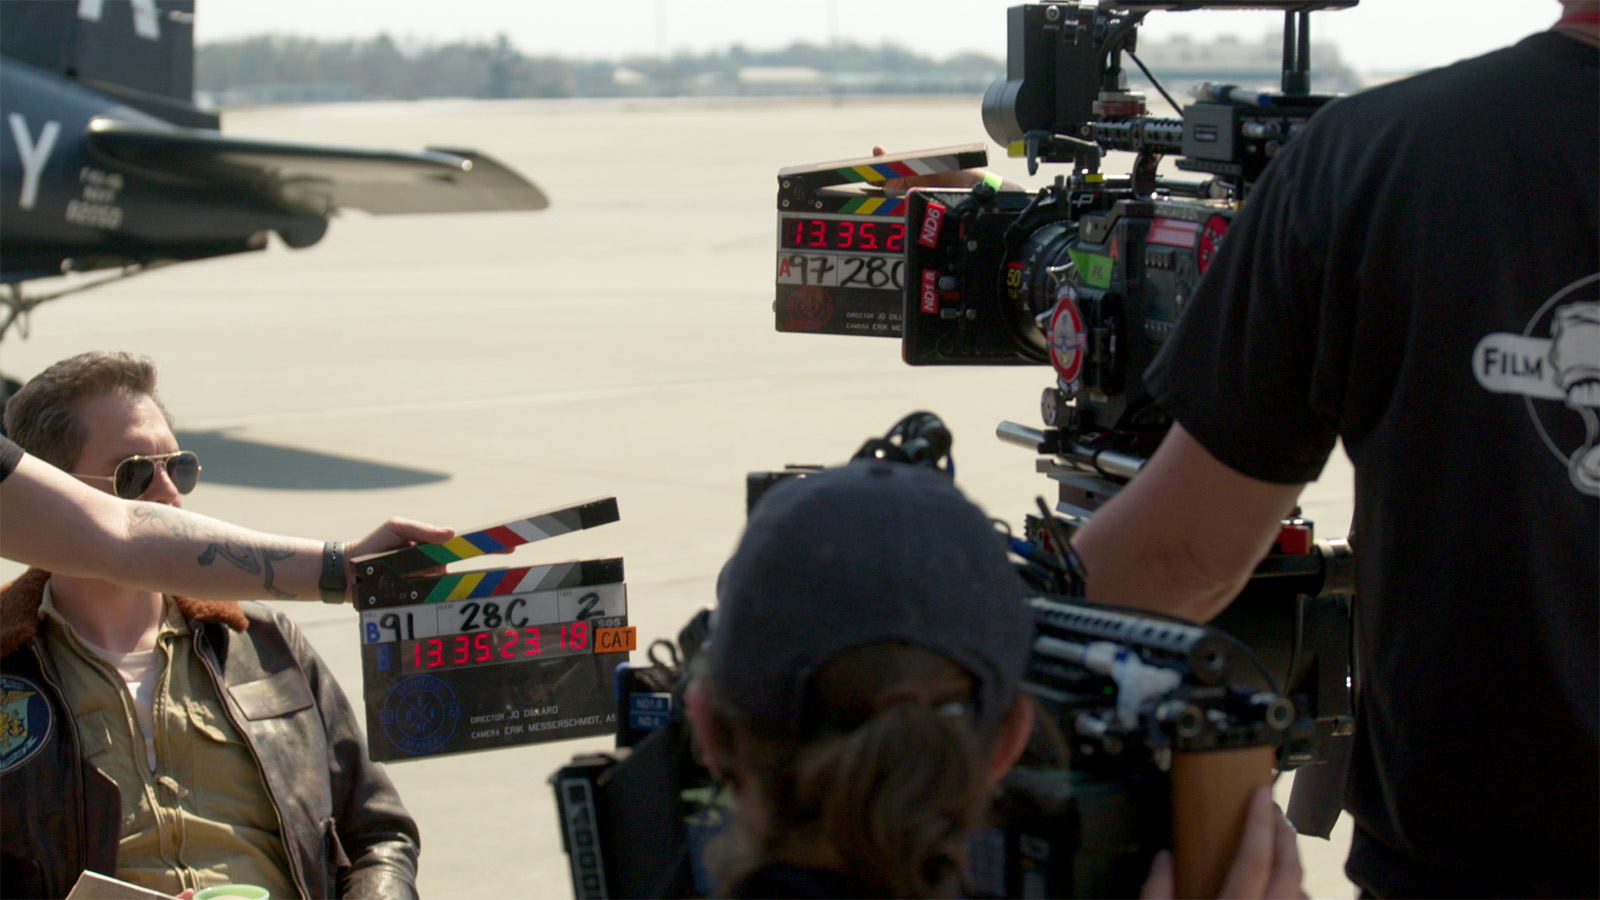 Devotion was shot on a variety of cameras, including the Panavision Millennium DXL2 shown here. Image © Sony Pictures Entertainment